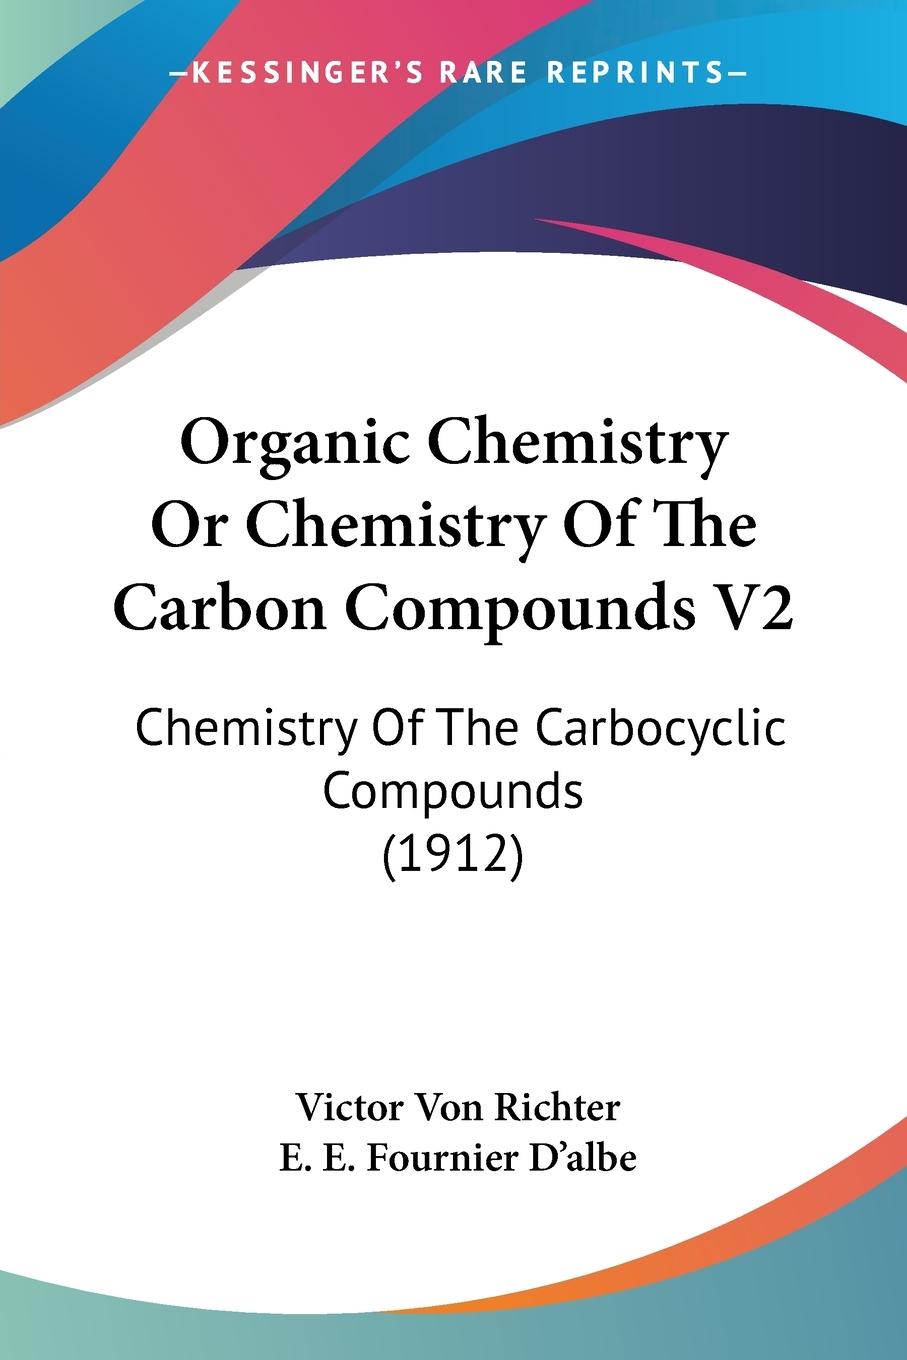 Organic Chemistry Or Chemistry Of The Carbon Compounds V2 - Richter, Victor Von